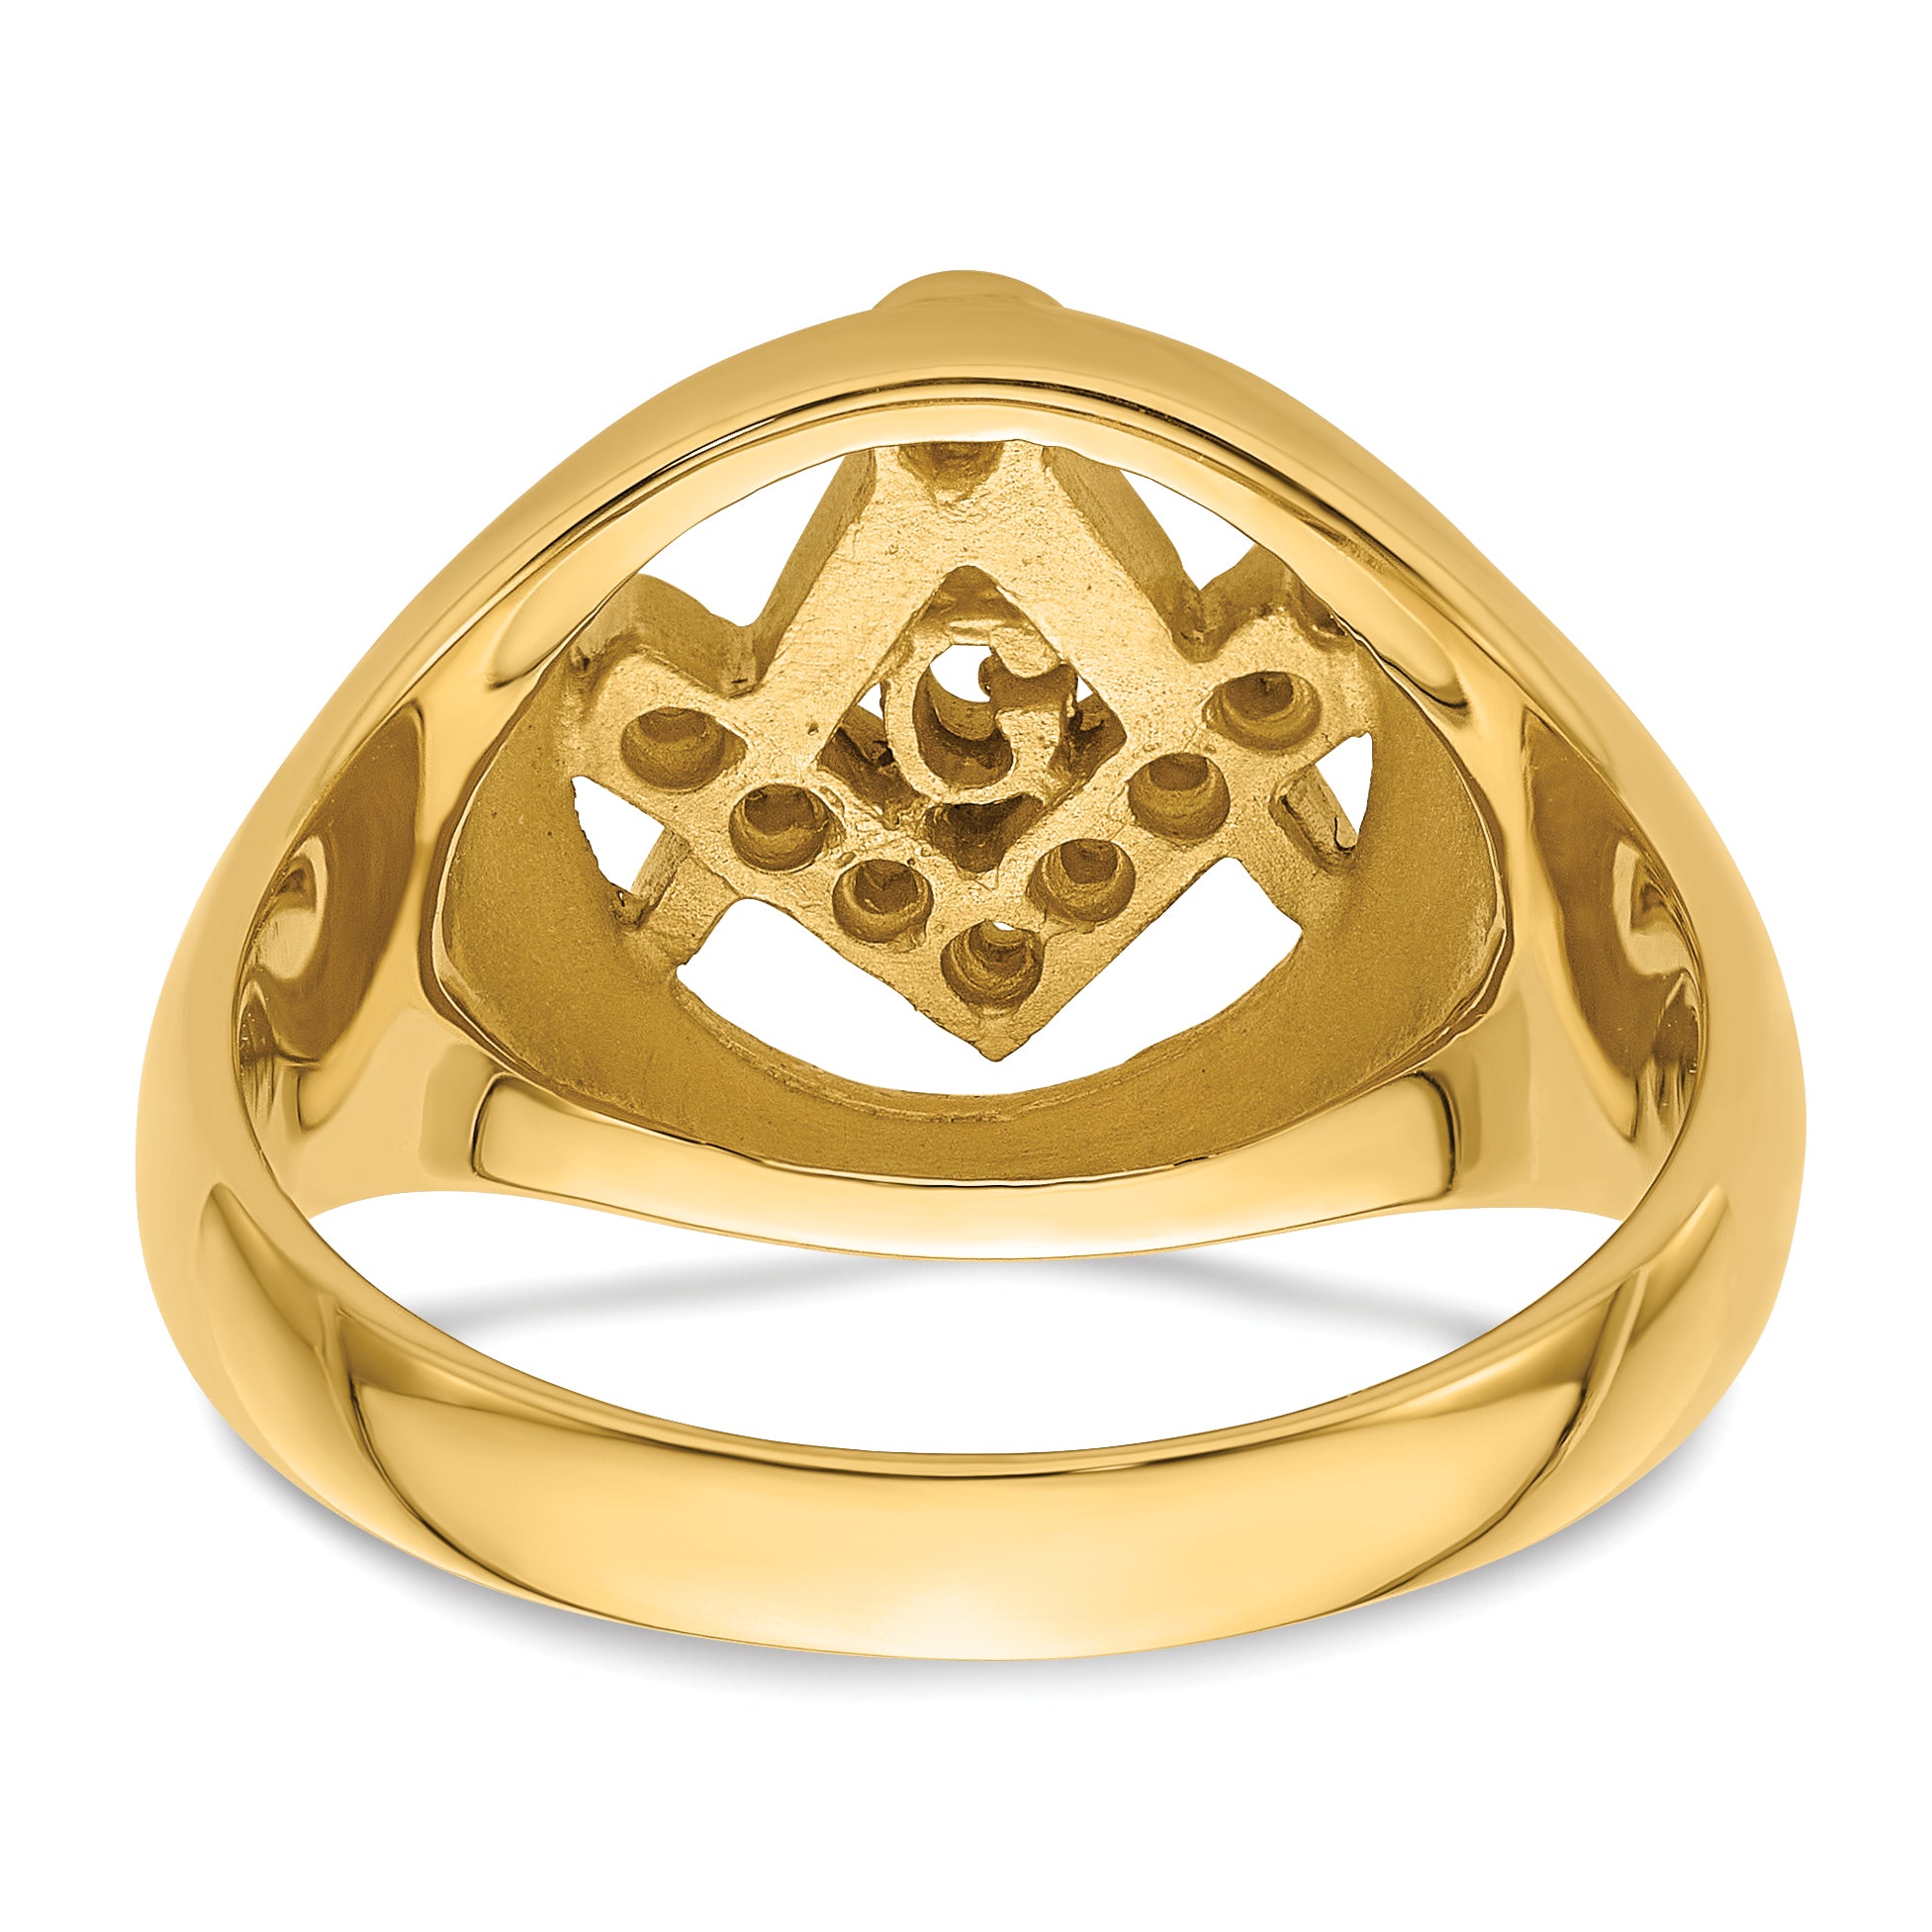 14k Men's Polished and Textured Masonic Ring Mounting